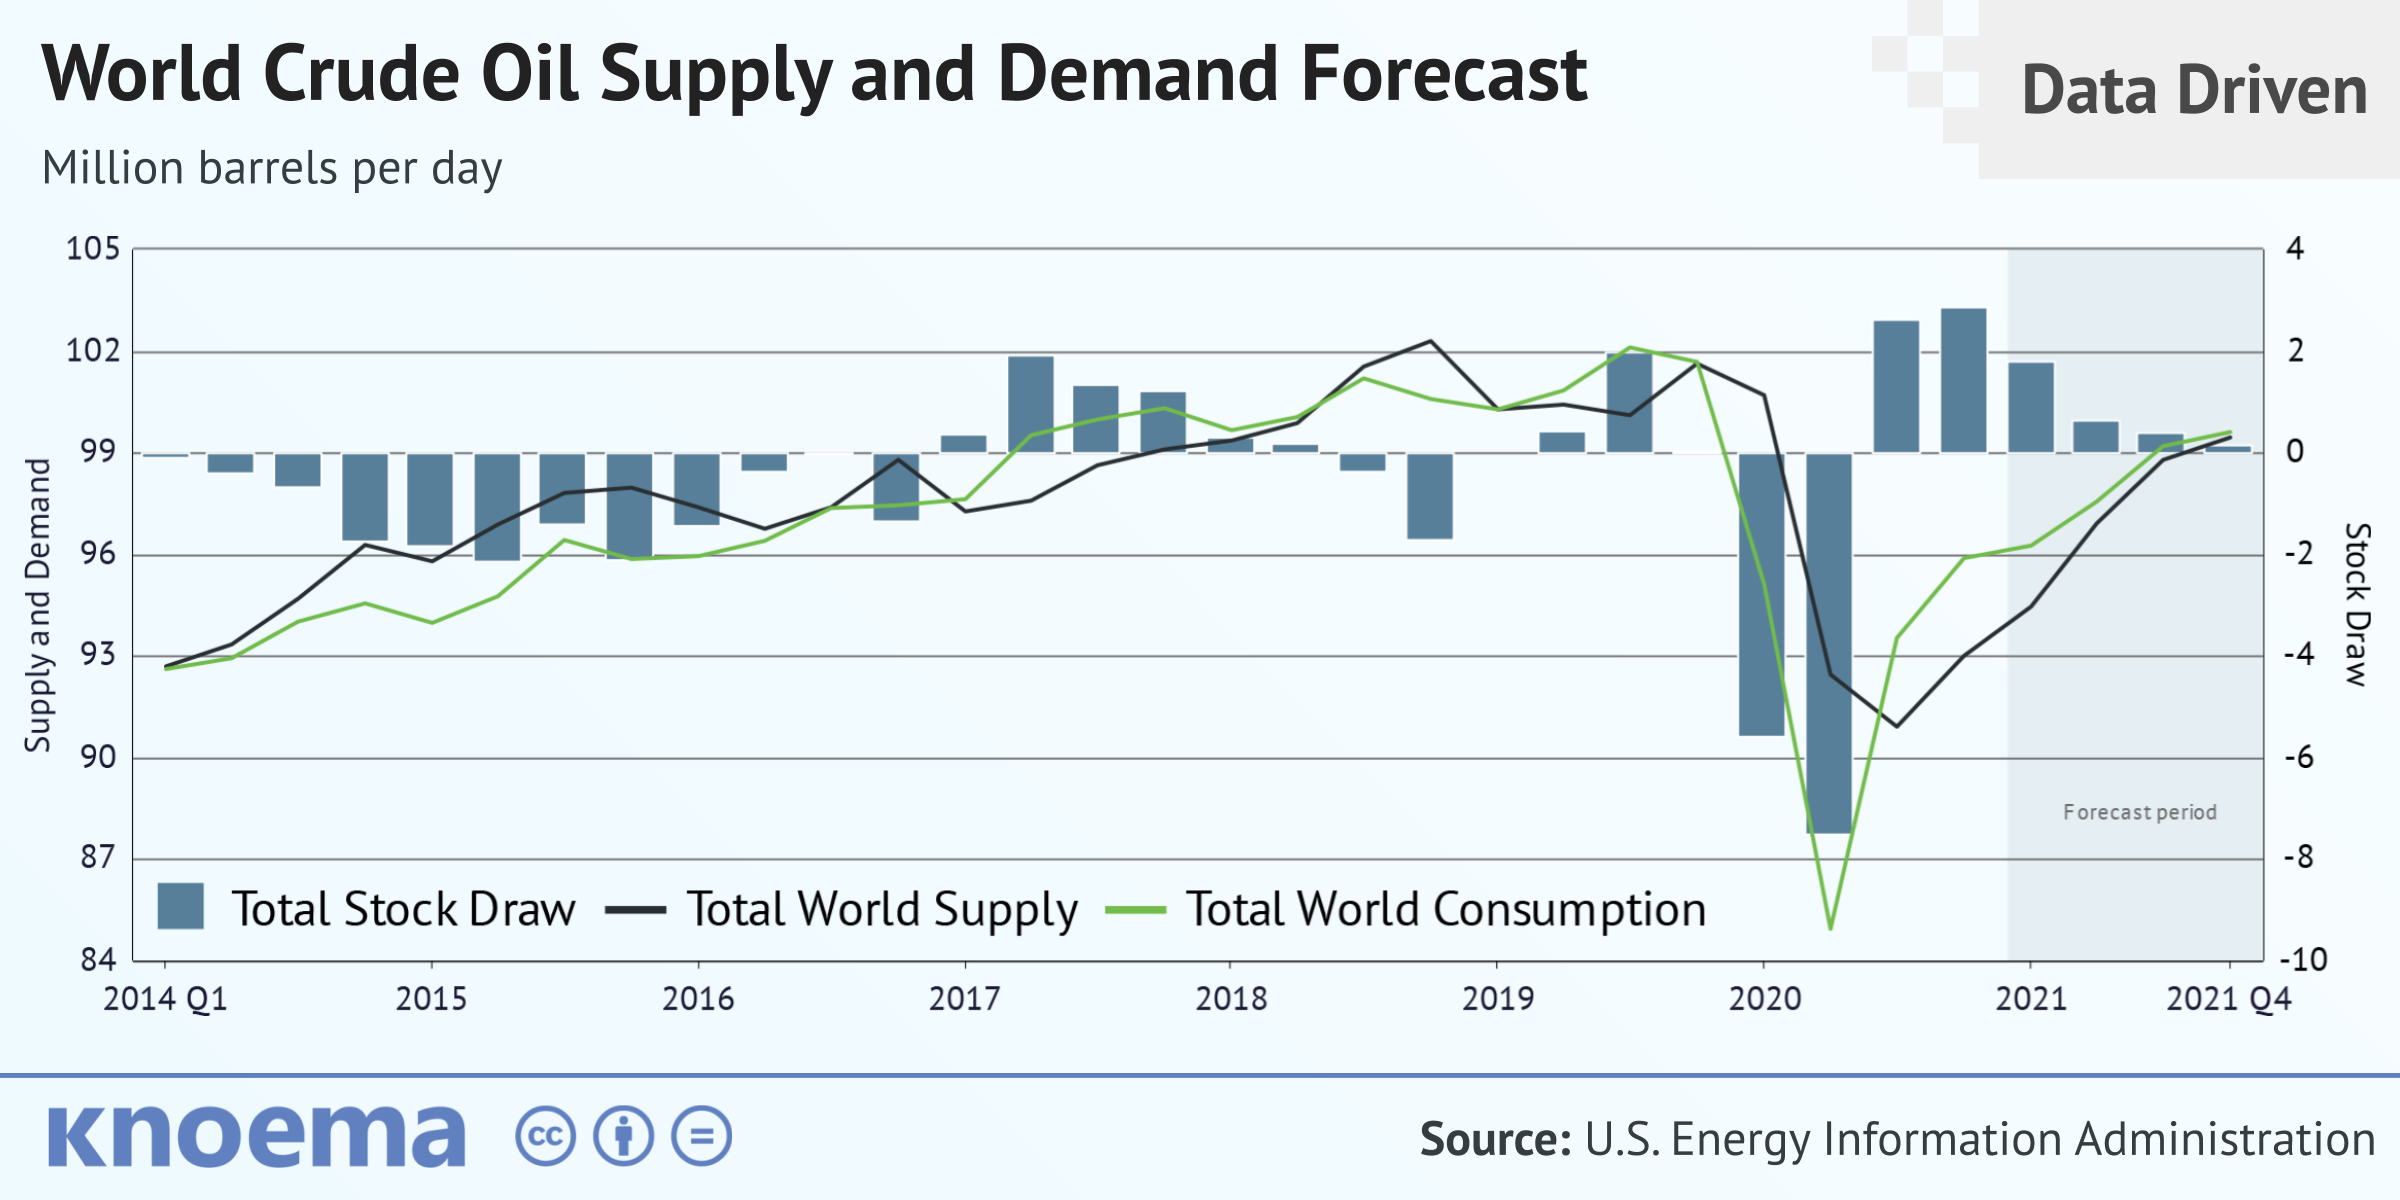 Knoema_Data_Driven_World_Crude_Oil_Supply_and_Demand_Forecast_Updated.png